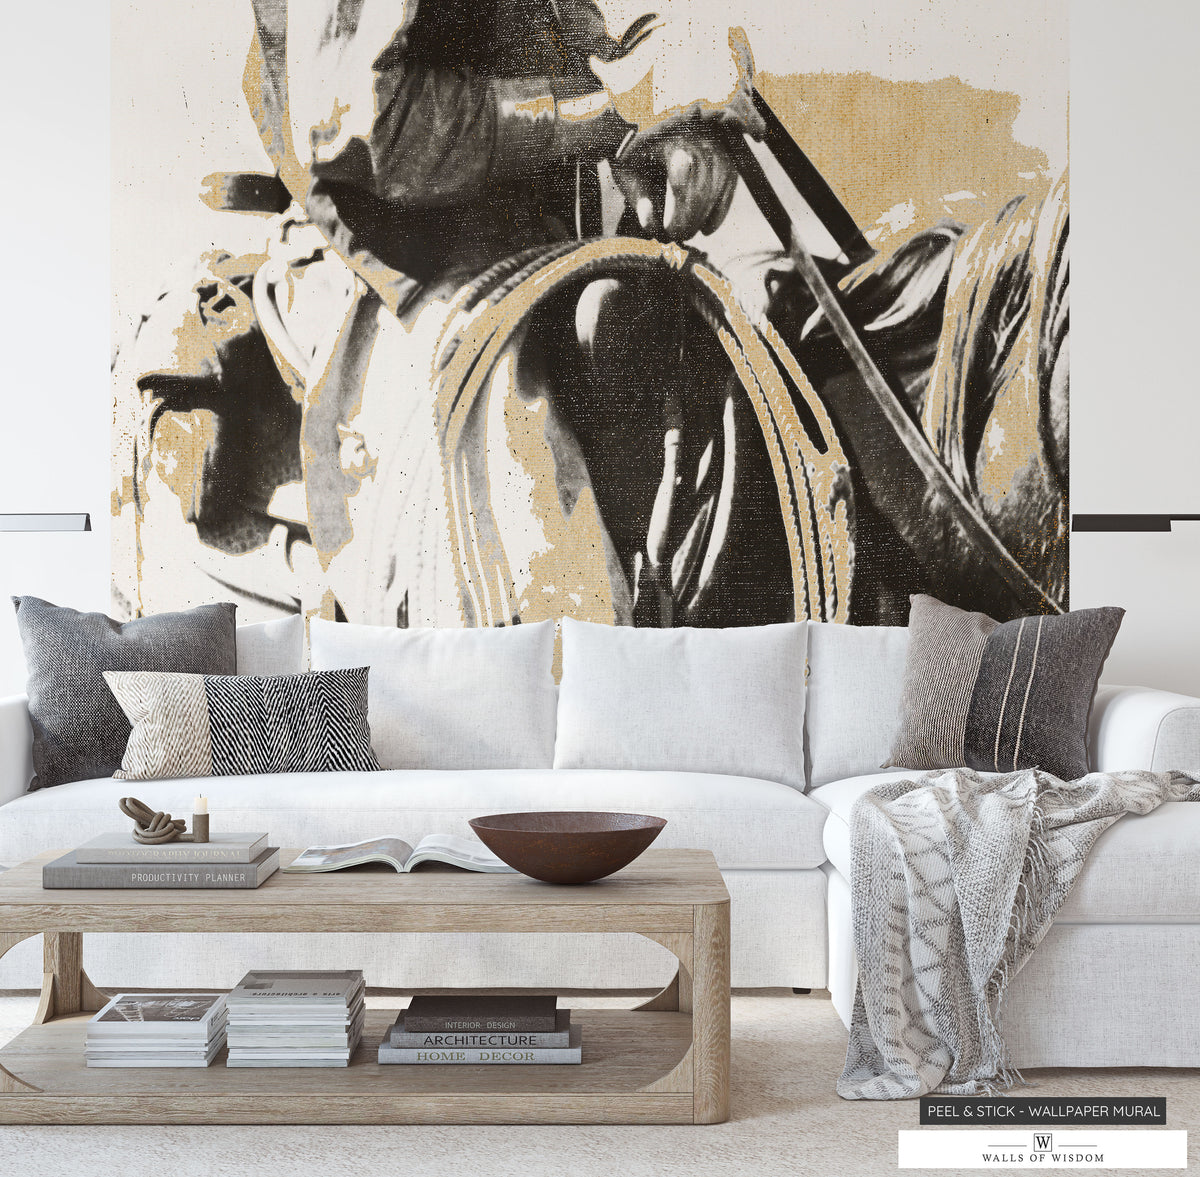 Vintage cowboy-inspired peel & stick mural, perfect for eclectic home decor.